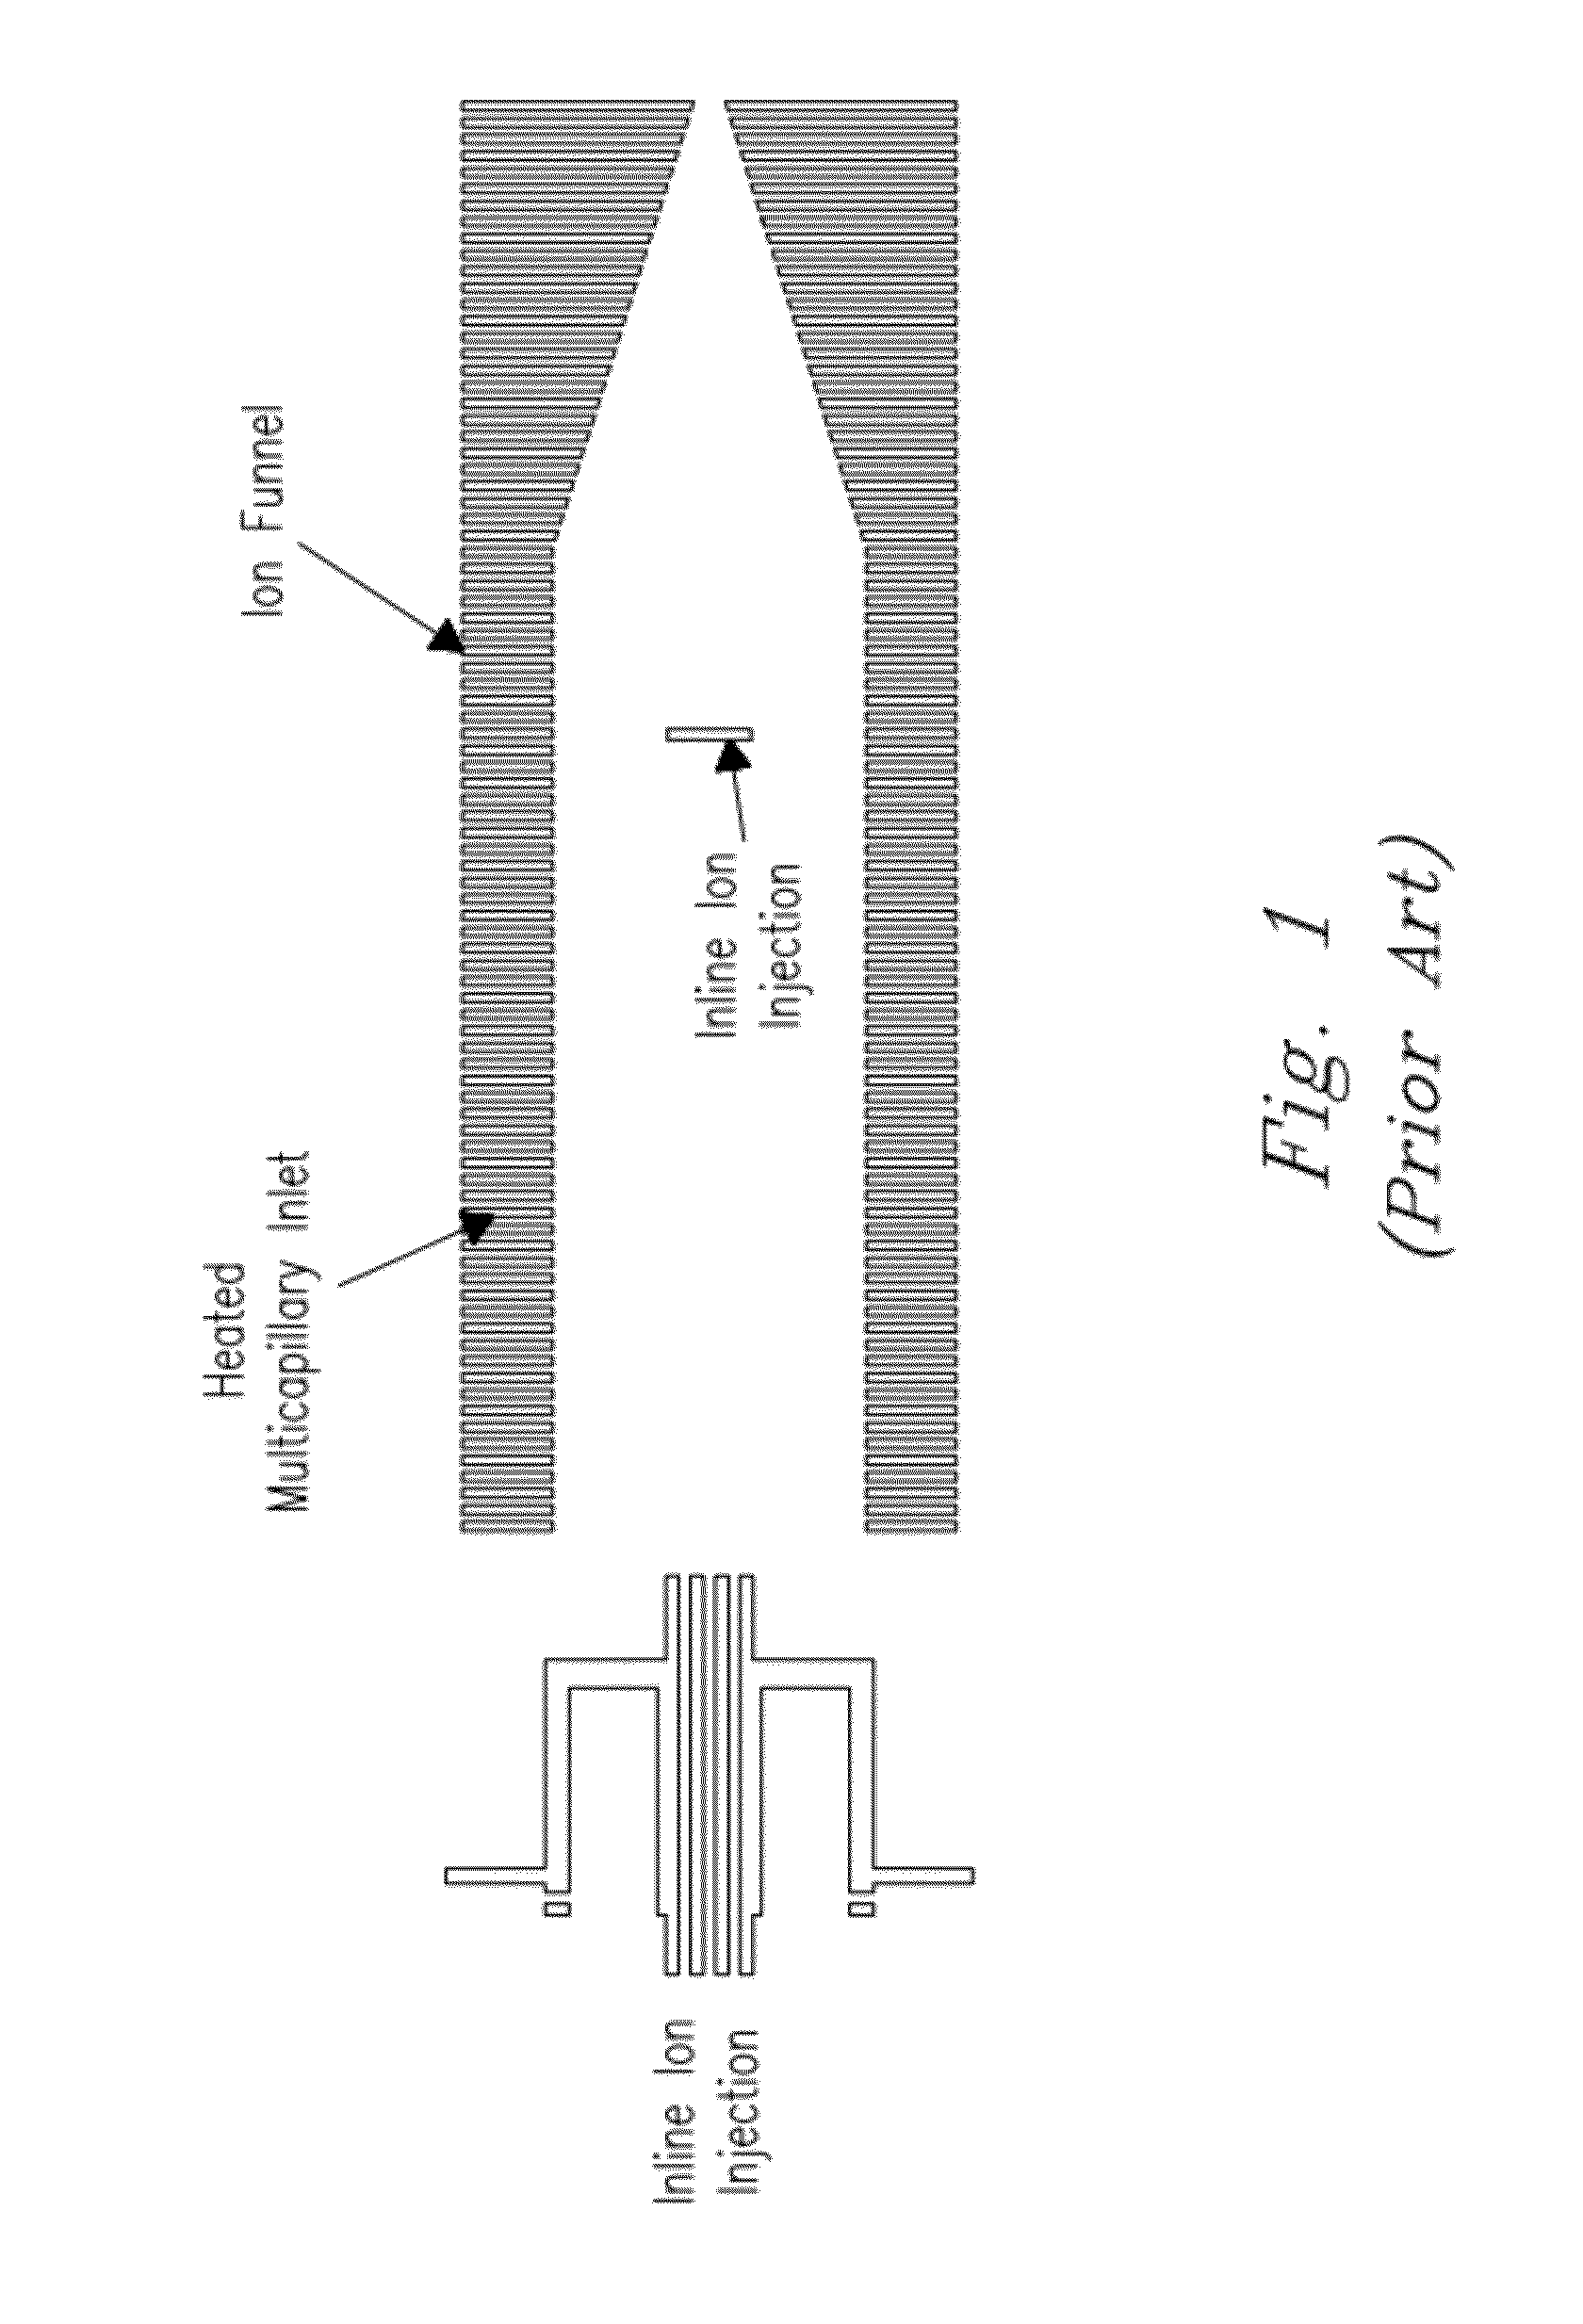 Orthogonal ion injection apparatus and process